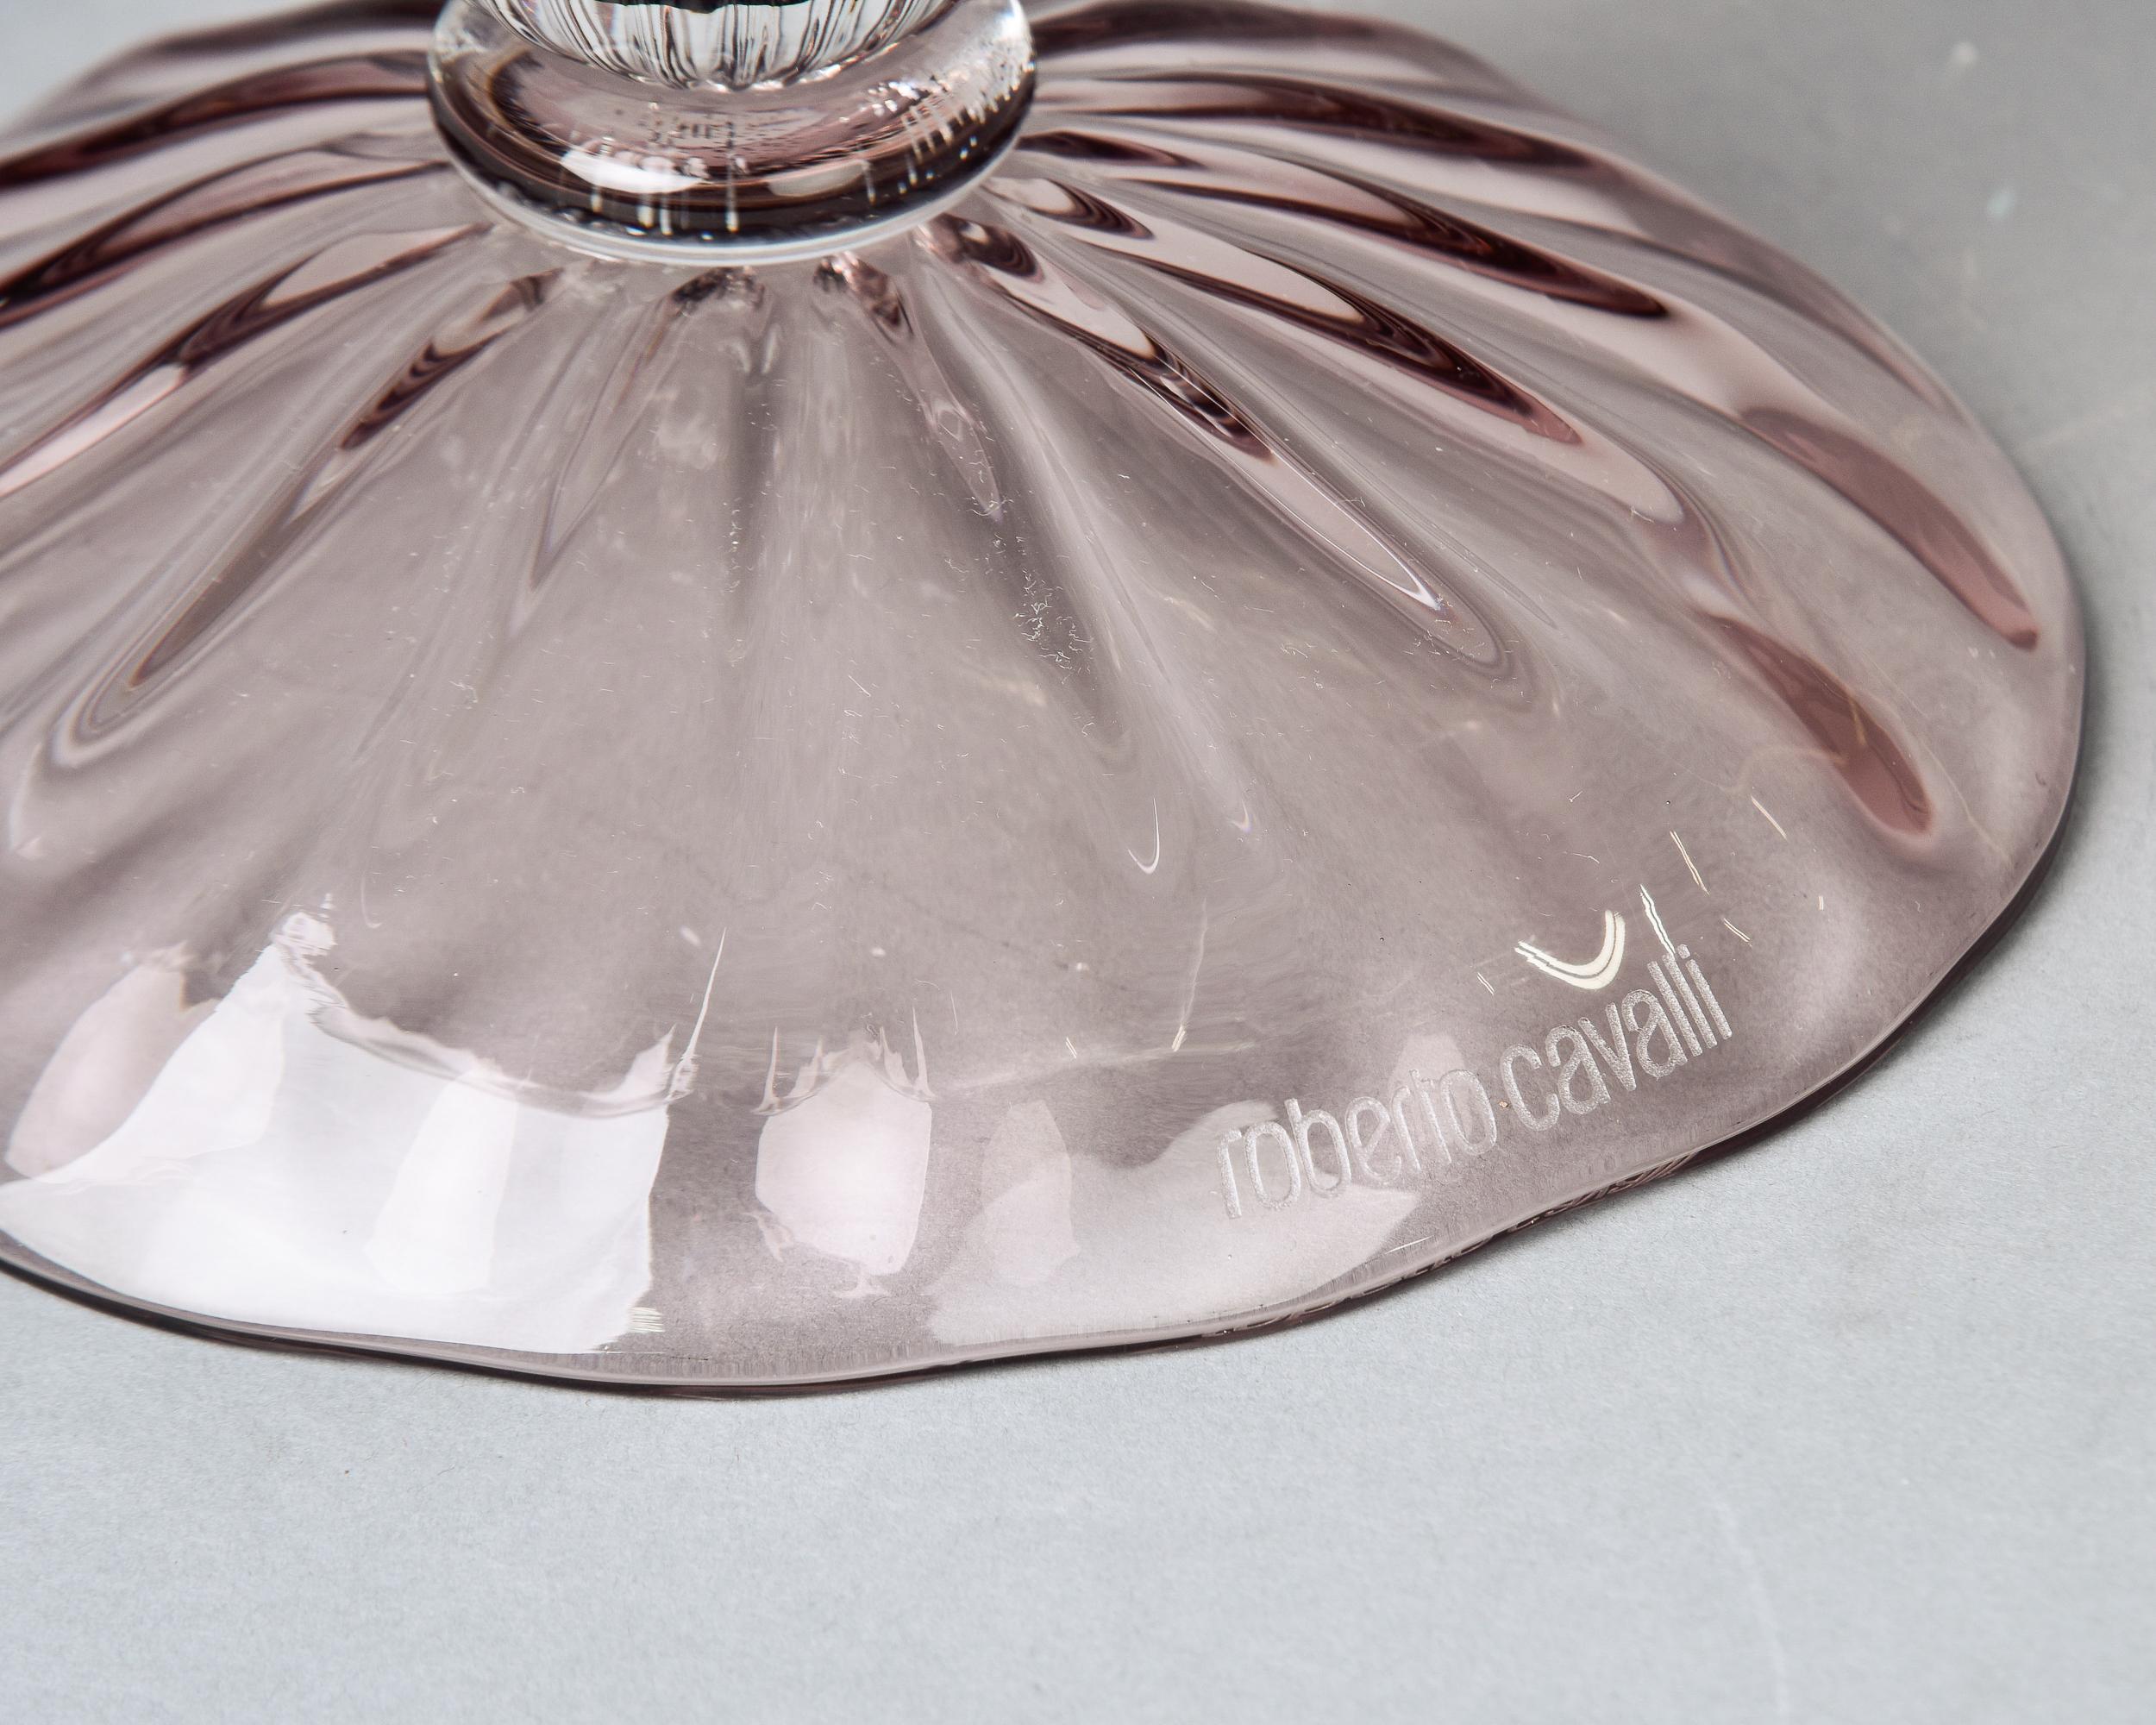 Large Vintage Signed Roberto Cavalli Pale Amethyst Glass Tazza or Pedestal Bowl For Sale 4